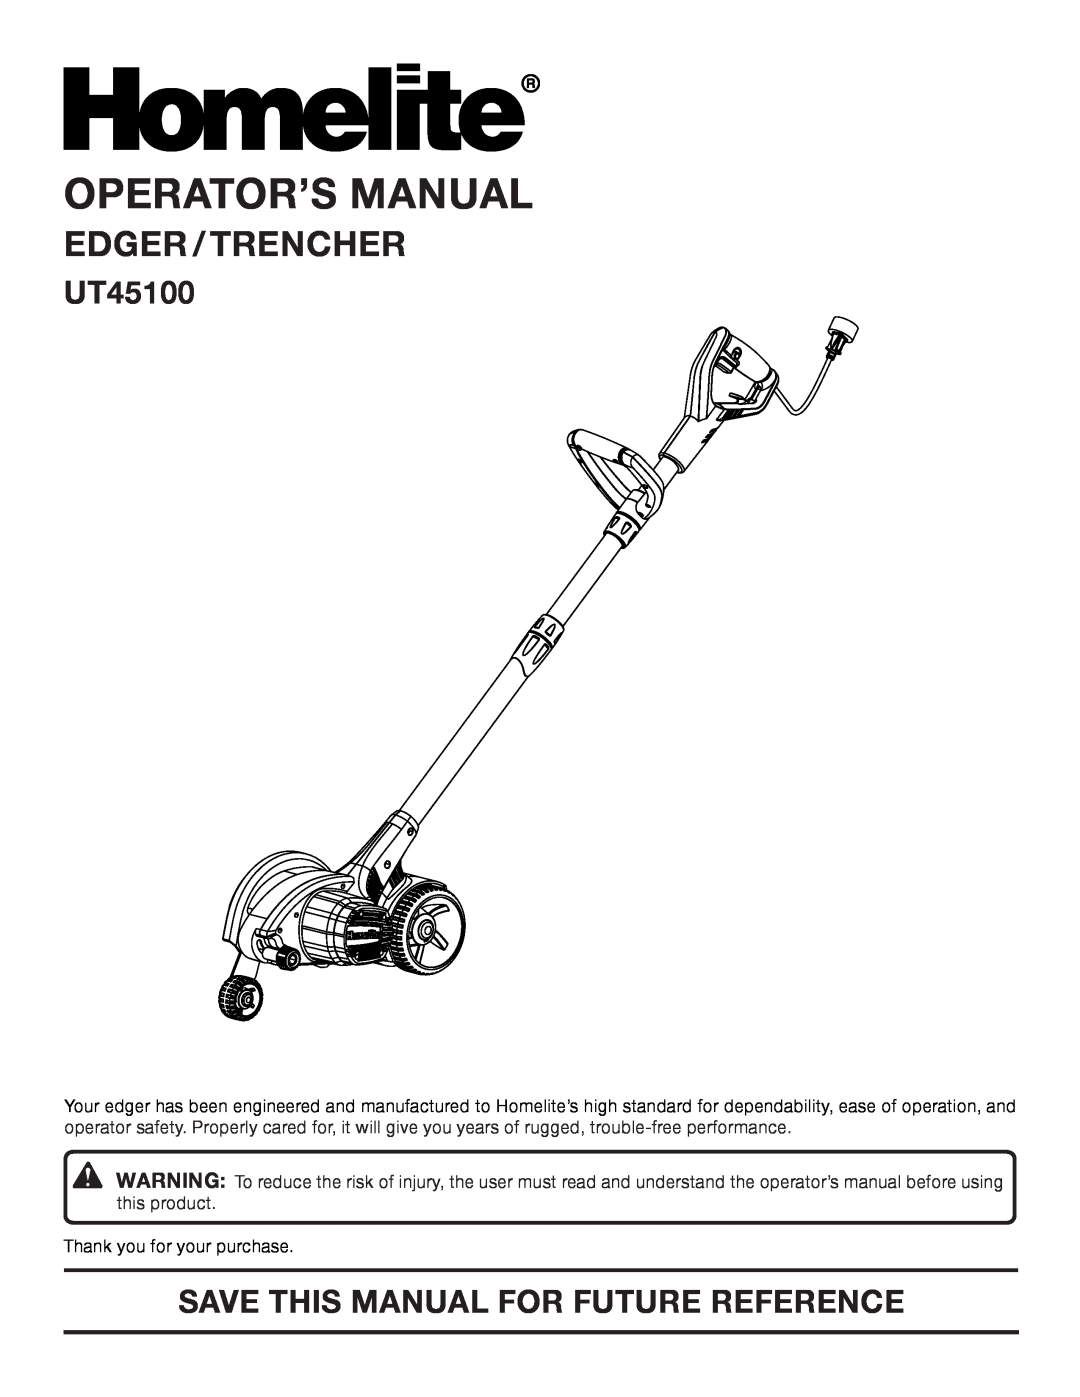 Homelite UT45100 manual Operator’S Manual, EDGER / trencher, Save This Manual For Future Reference 